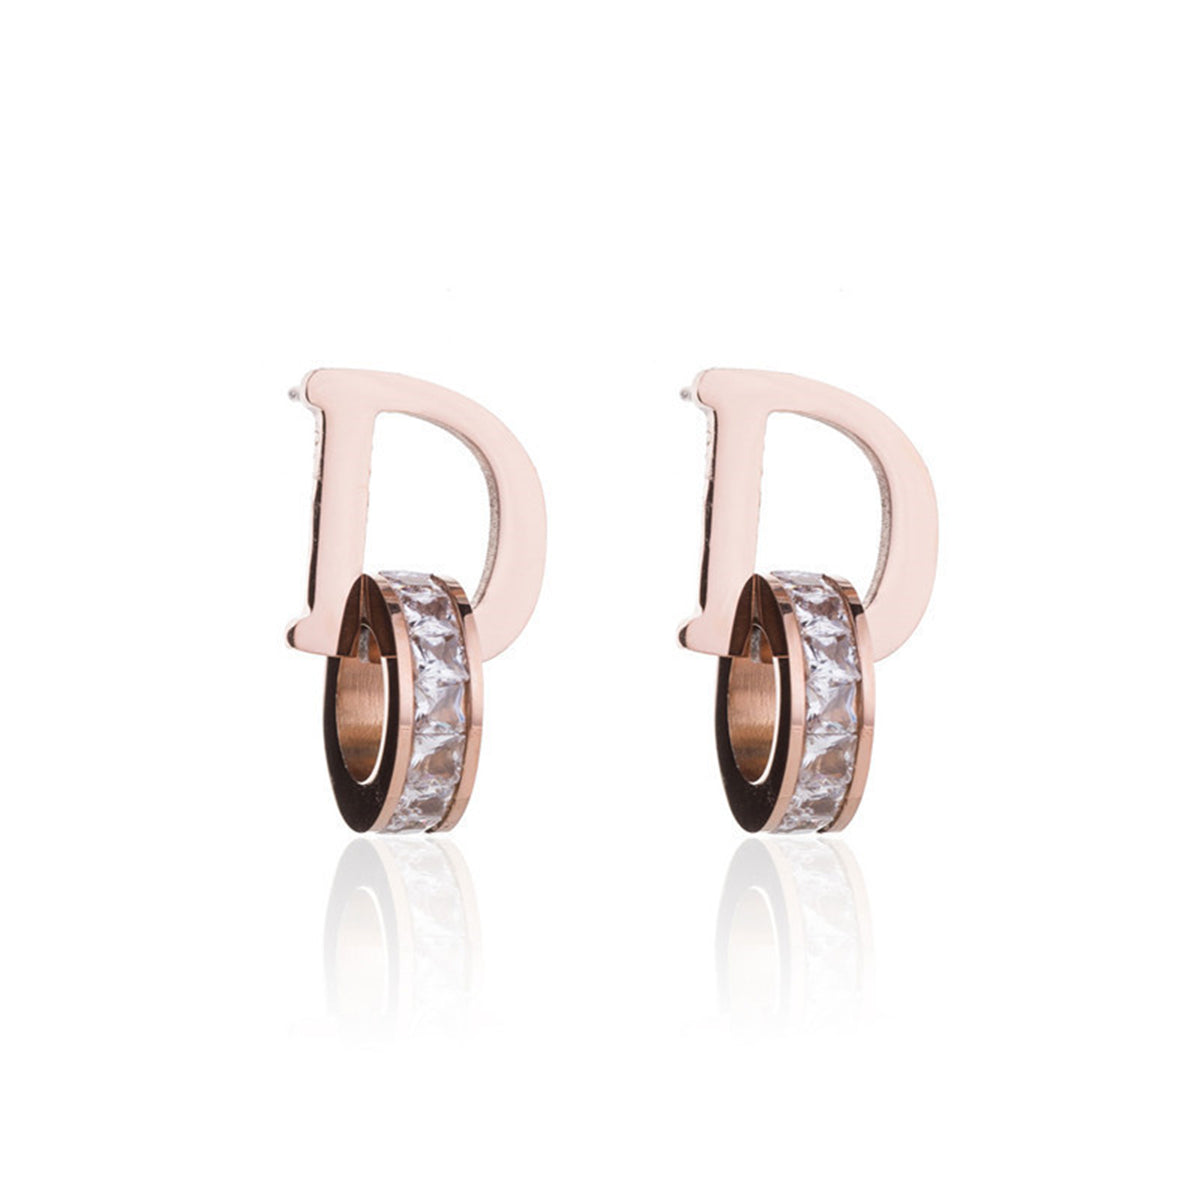 Cubic Zirconia & 18K Rose Gold-Plated D Stud Earrings